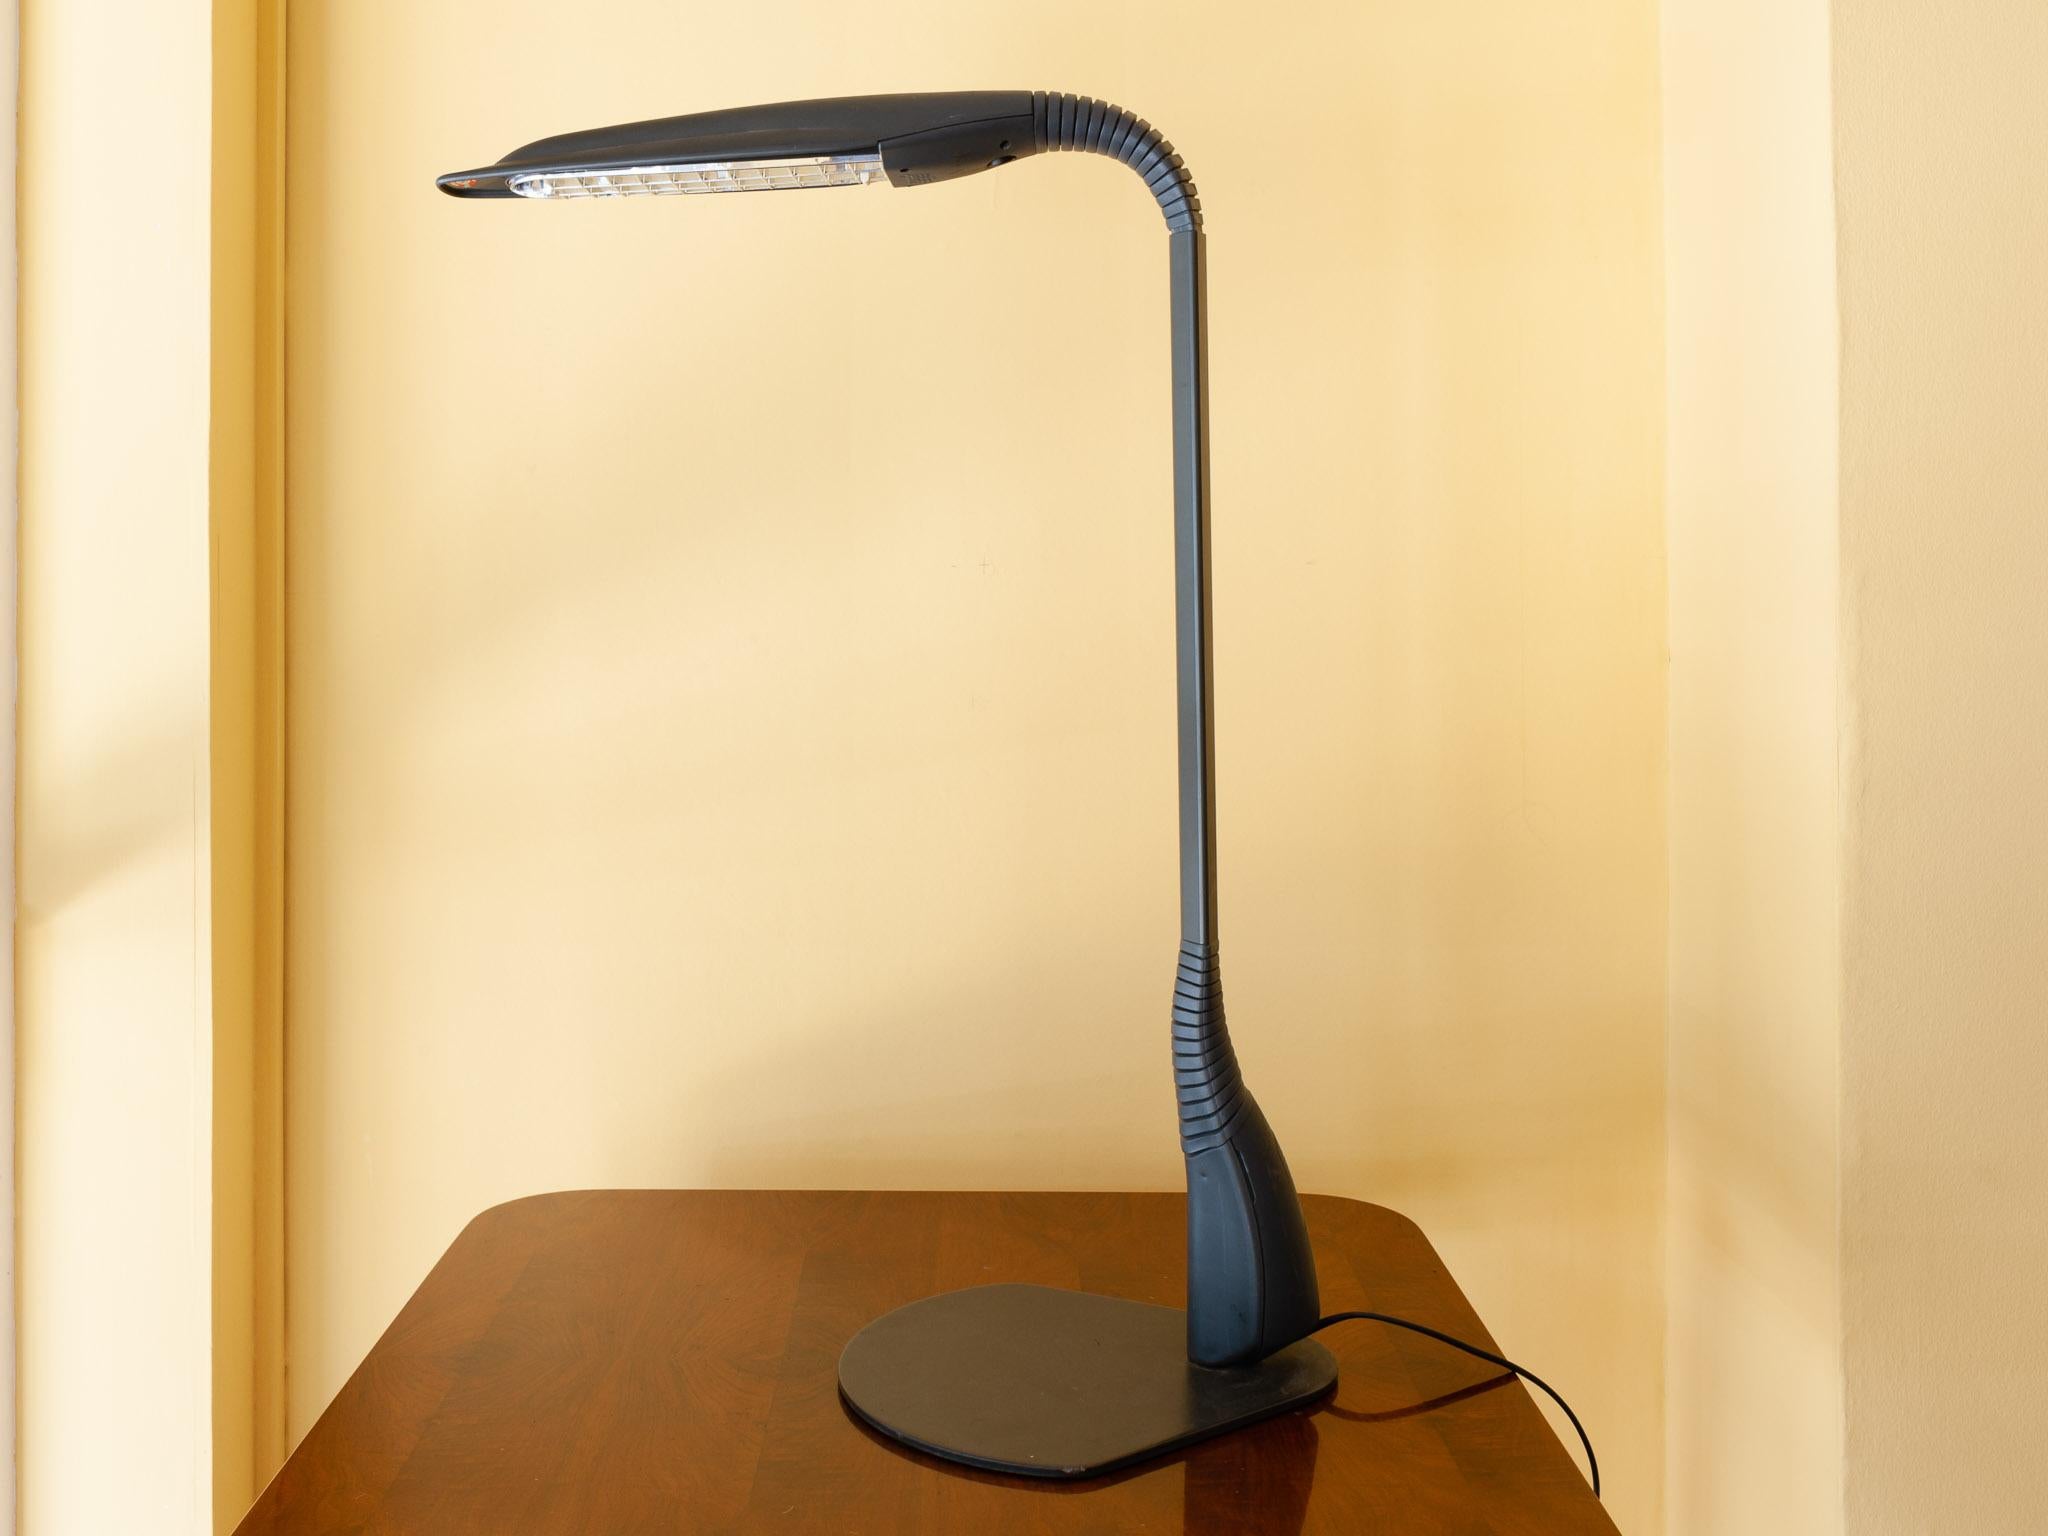 An interesting and unusual desk lamp designed in the shape of a Cobra snake. Designed in the 1980s in France by Philippe Michel for light manufacturer Manade. The desk lamp is flexible in two places which makes it very easy to direct the light to